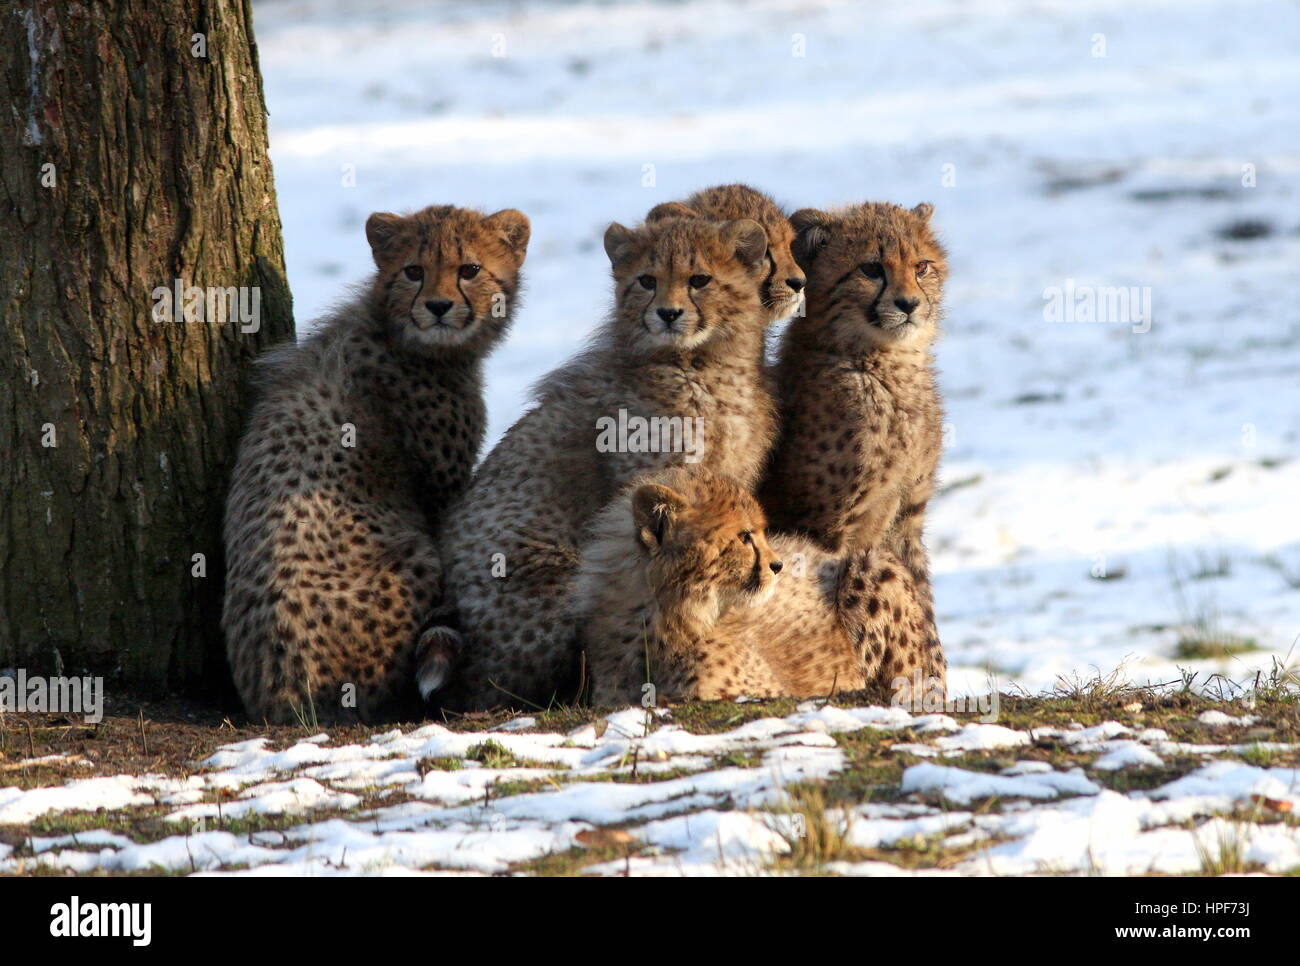 Five young African Cheetah cubs (Acinonyx jubatus) in the snow in winter. Stock Photo